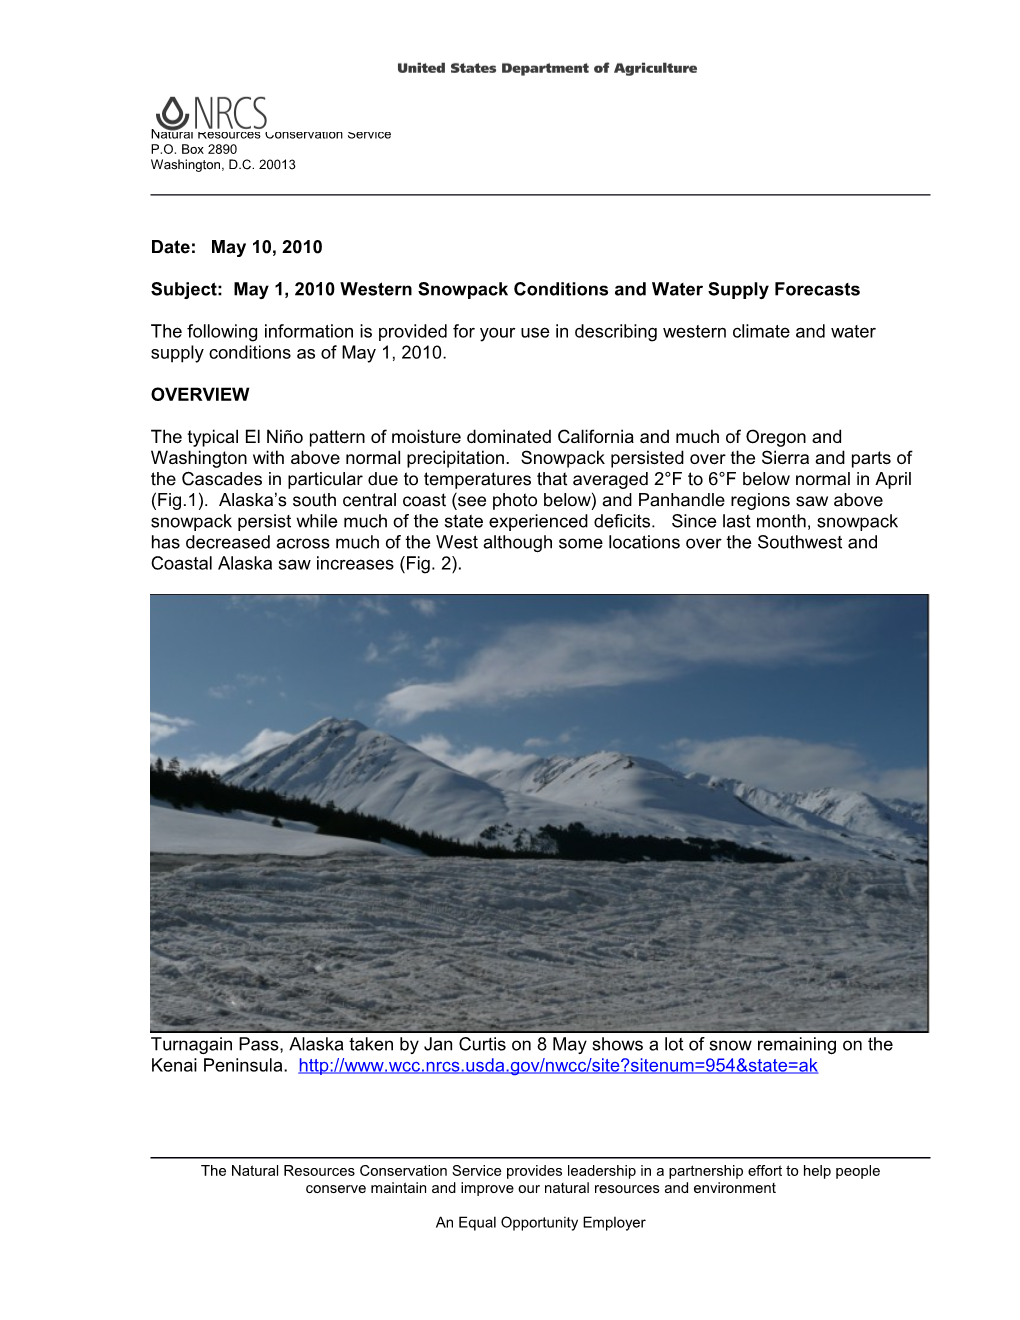 Subject: May 1, 2010Western Snowpack Conditions and Water Supply Forecasts